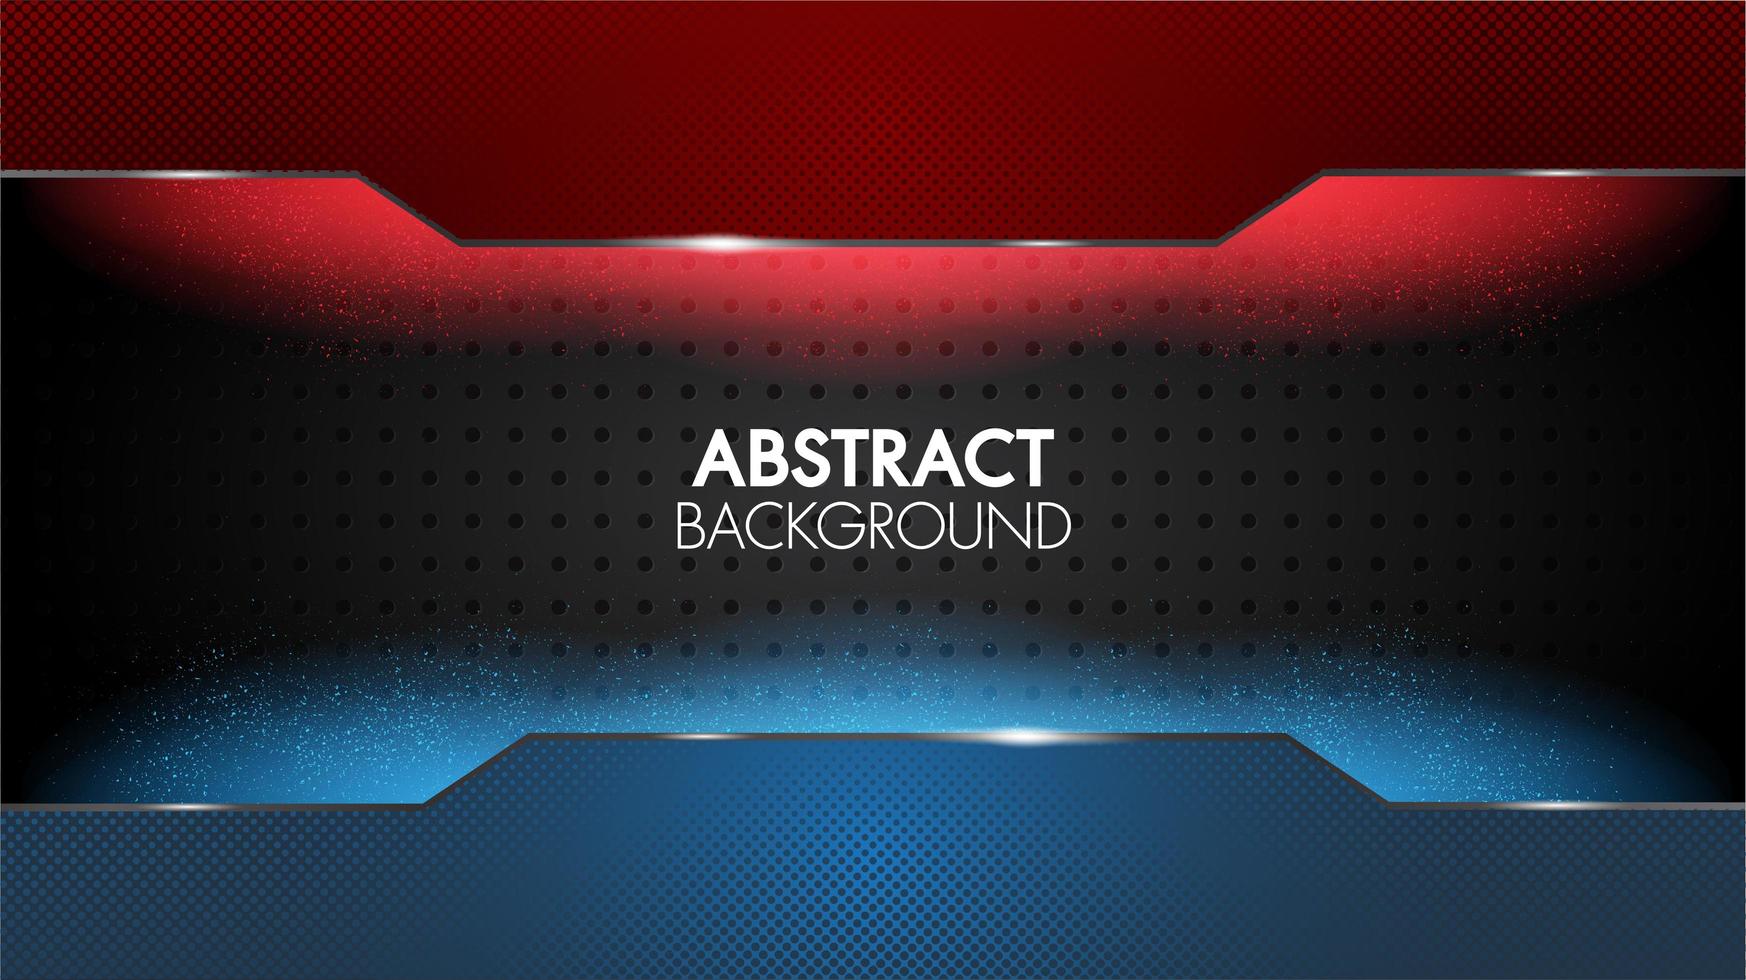 Black abstract geometric elegant red and blue background vector